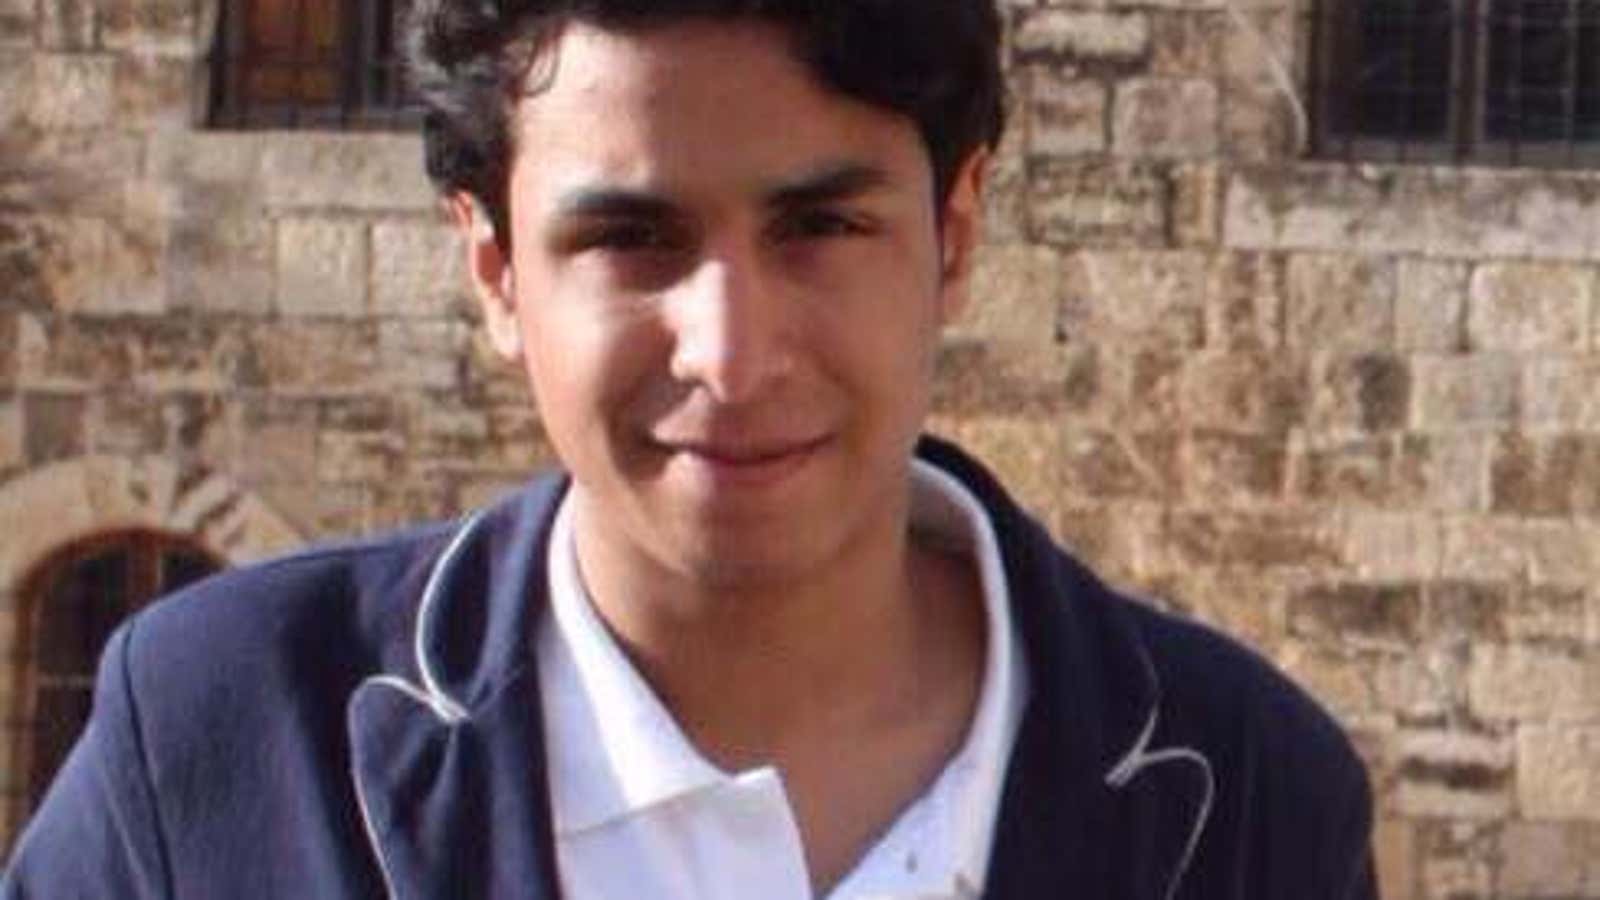 Saudi Arabia is preparing to behead and crucify a 21-year-old activist